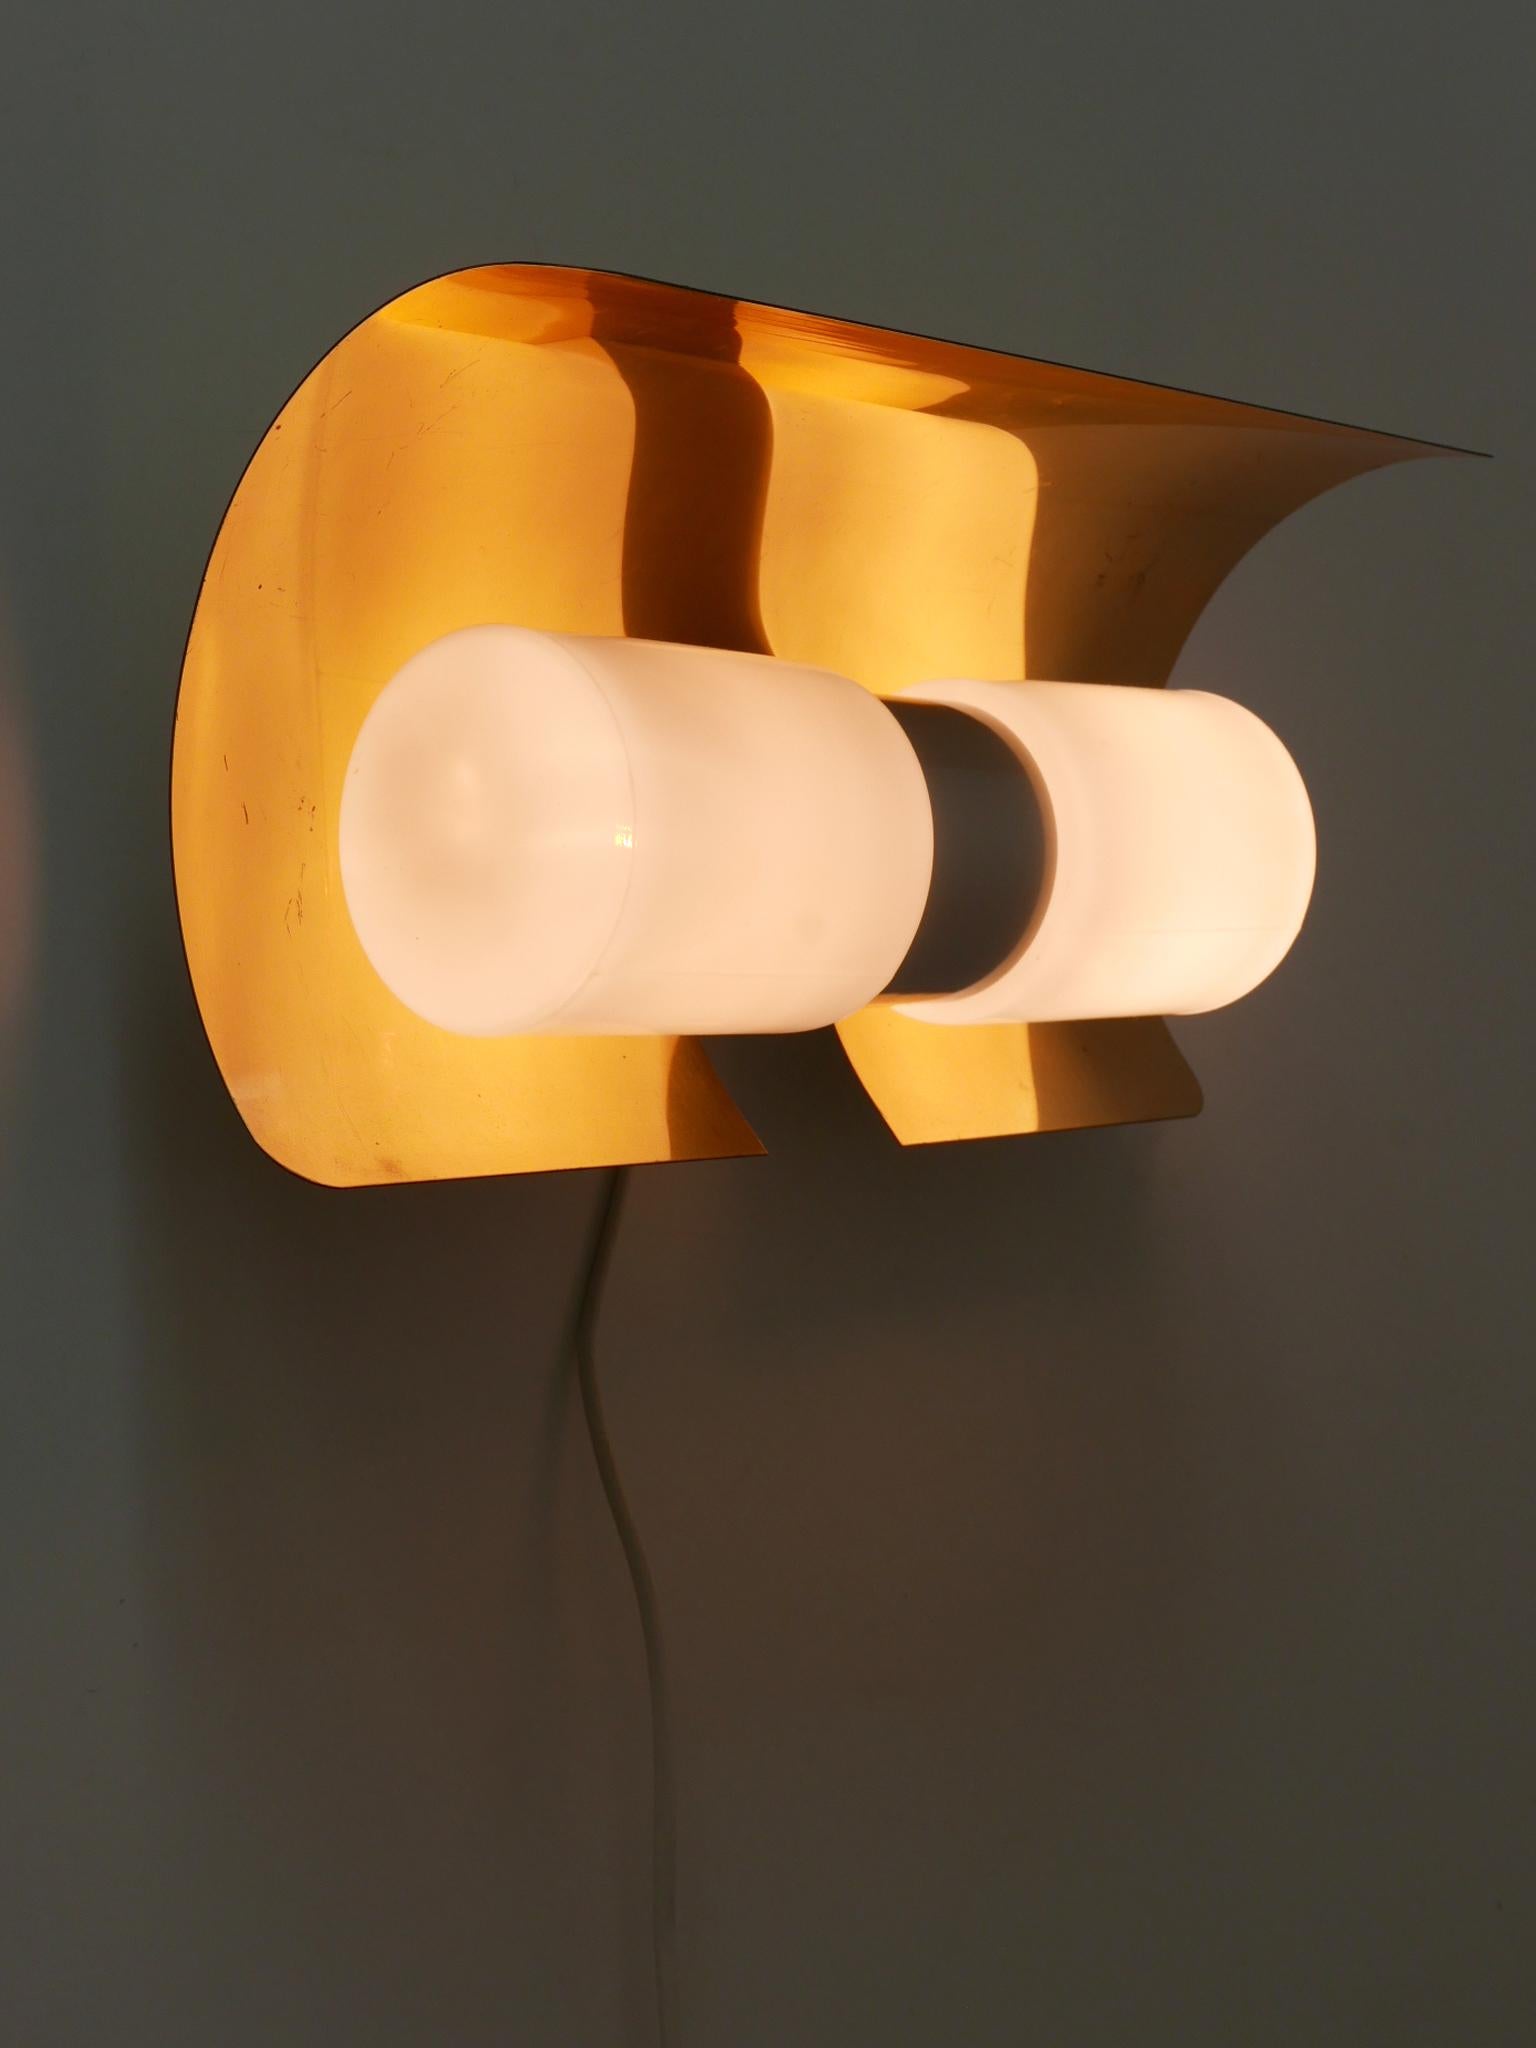 Rare Mid Century Modern Sconce by Hans-Agne Jakobsson for AB Markaryd 1950s For Sale 7